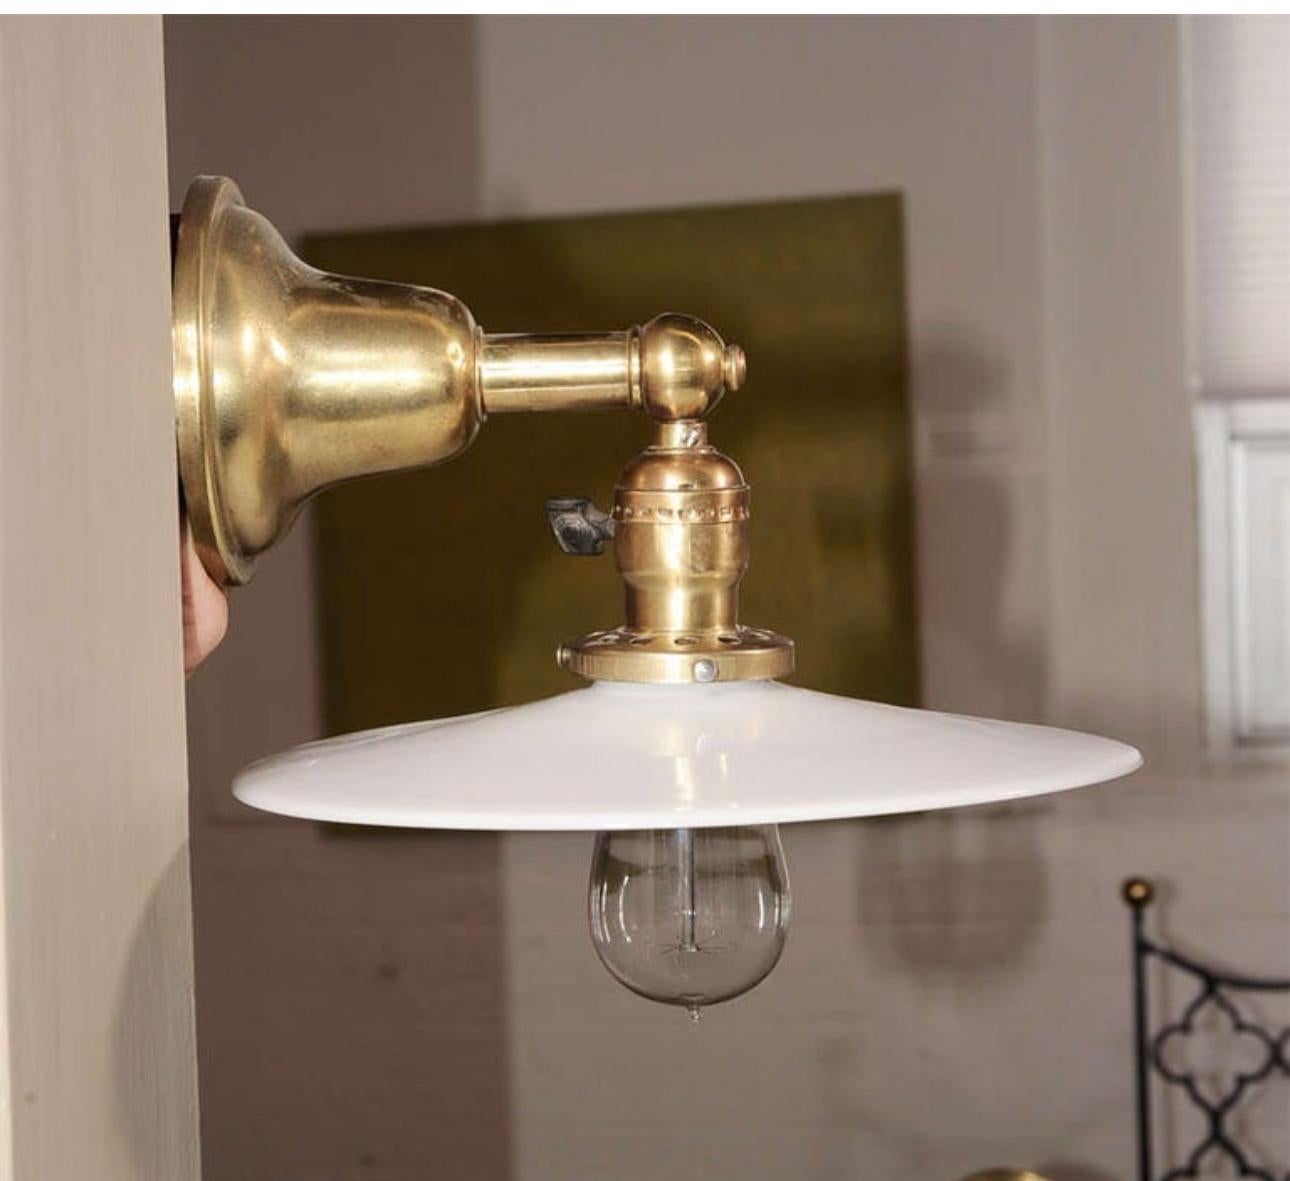 Pair of vintage brass wall lights / sconces with antique white milk glass disk shades. USA, circa 1910.

Dimensions:
4.5 inch wall plate diameter (part that mounts to wall) 
9 inch depth overall/projection from wall (including shade)
8 inch width